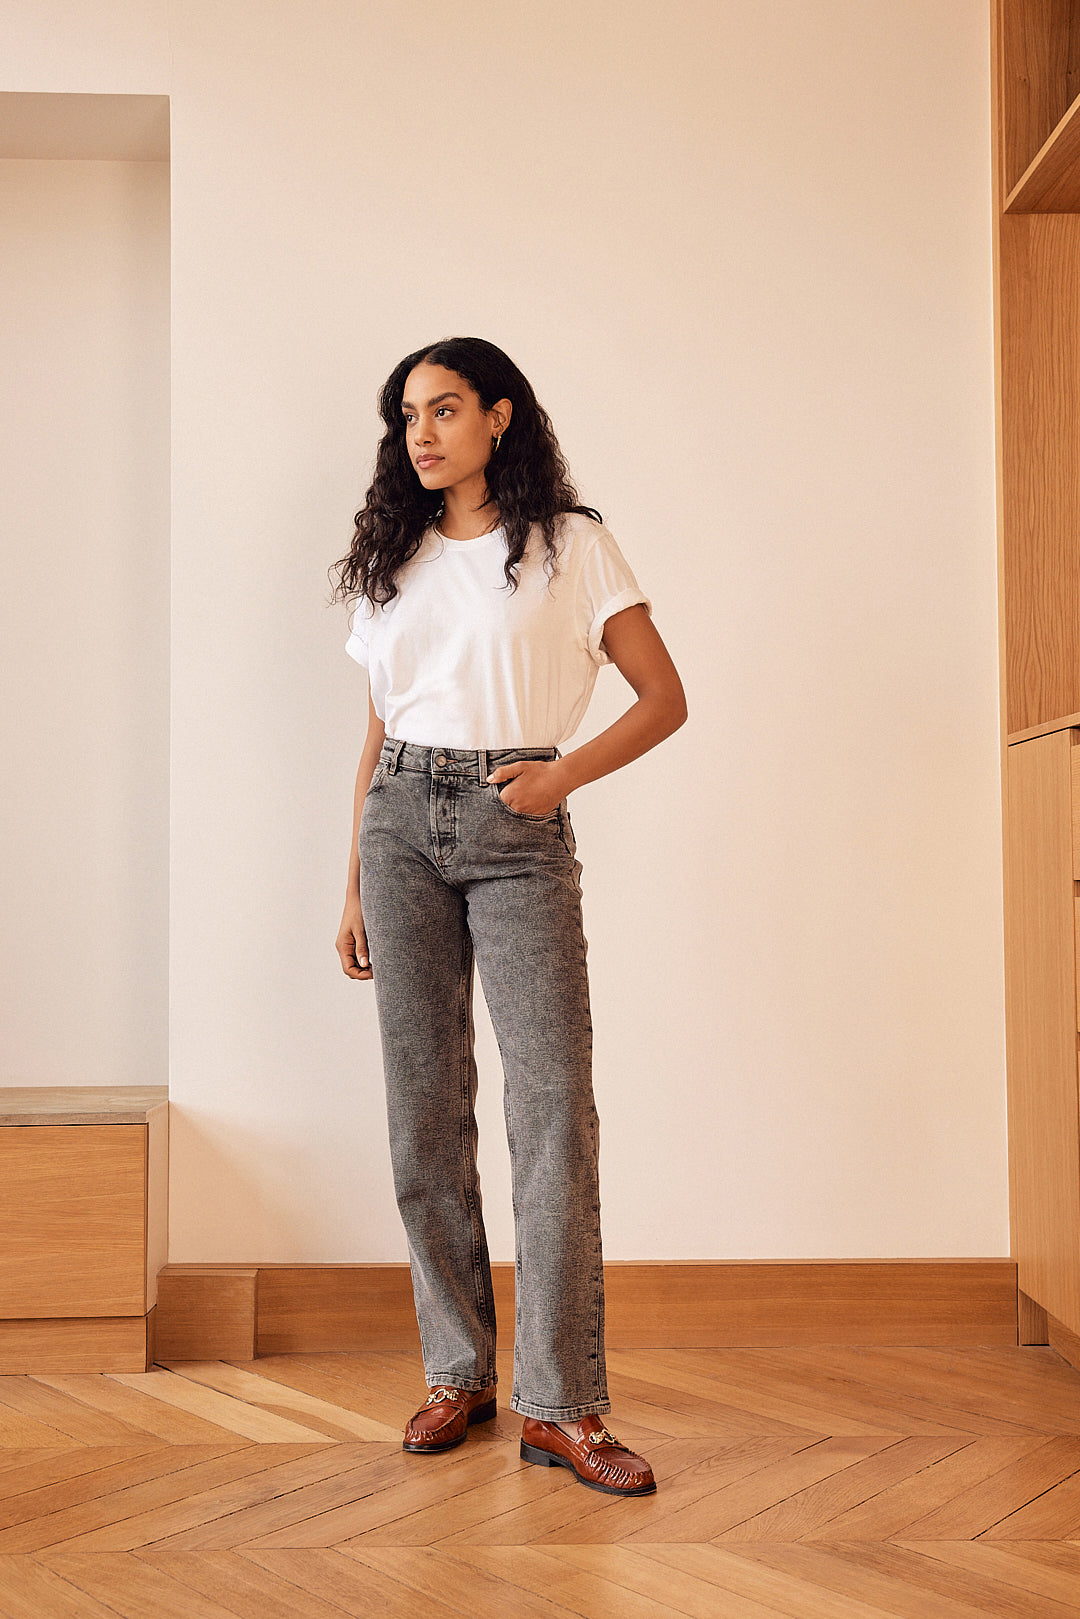 Exploring French Girl Style: A Lesson On Effortless Denim - The